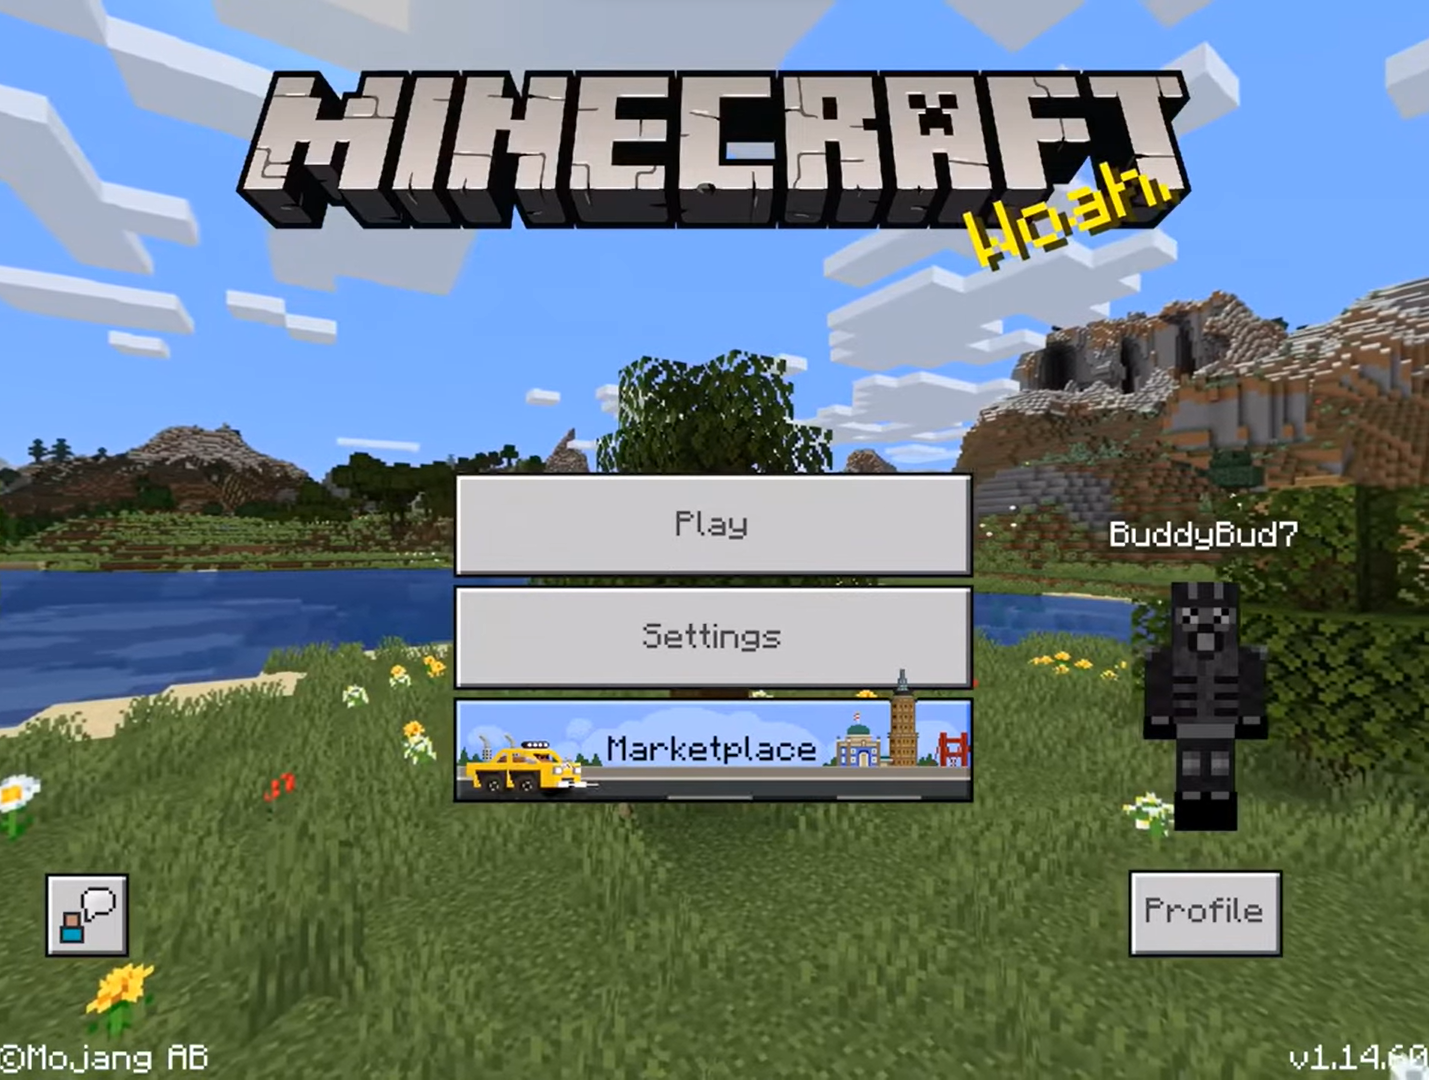 Minecraft menu and landscape with river